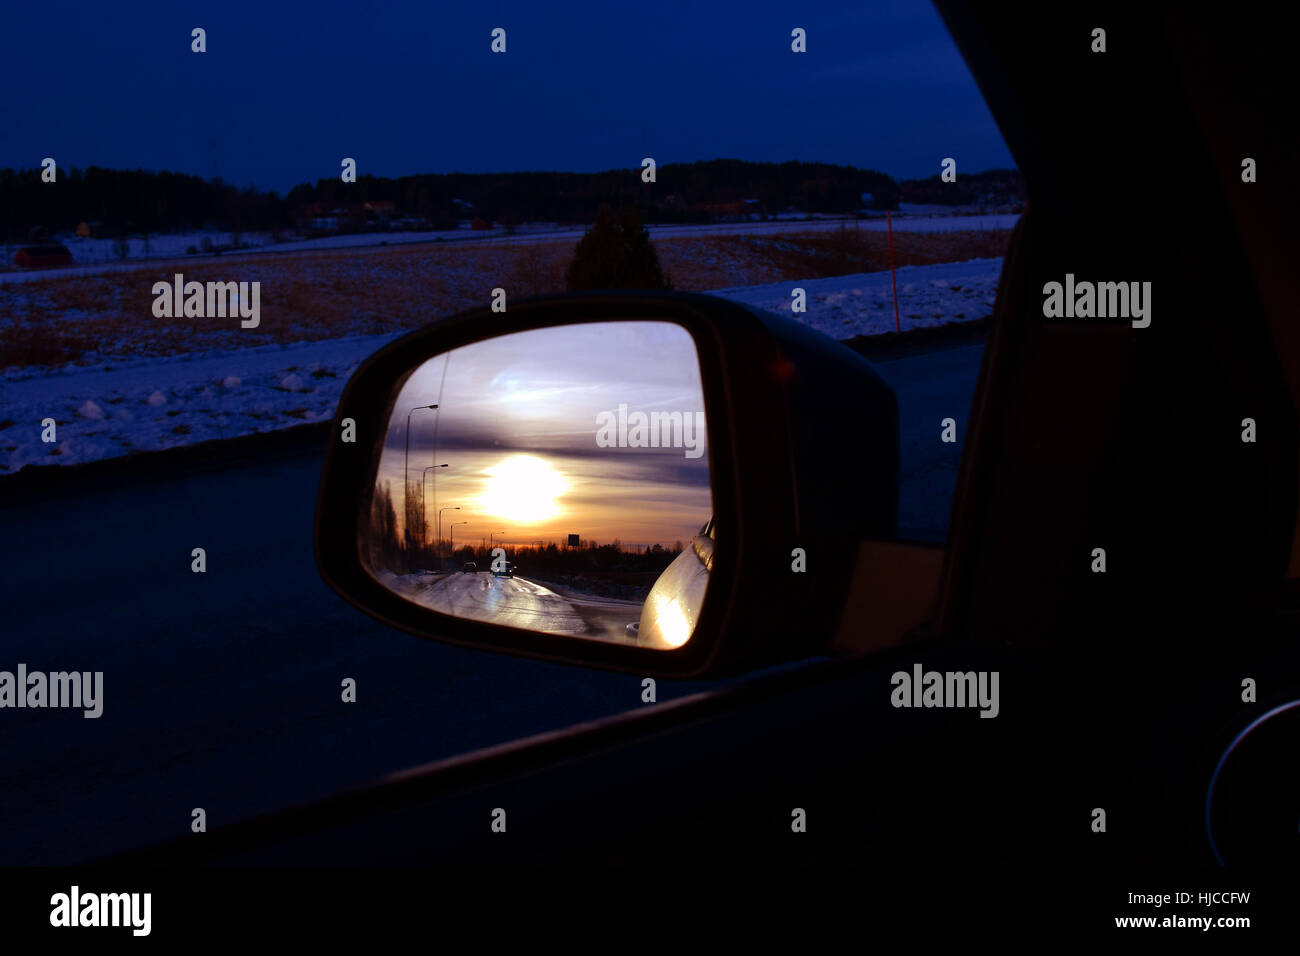 Sunset reflected in car side-view mirror. Stock Photo